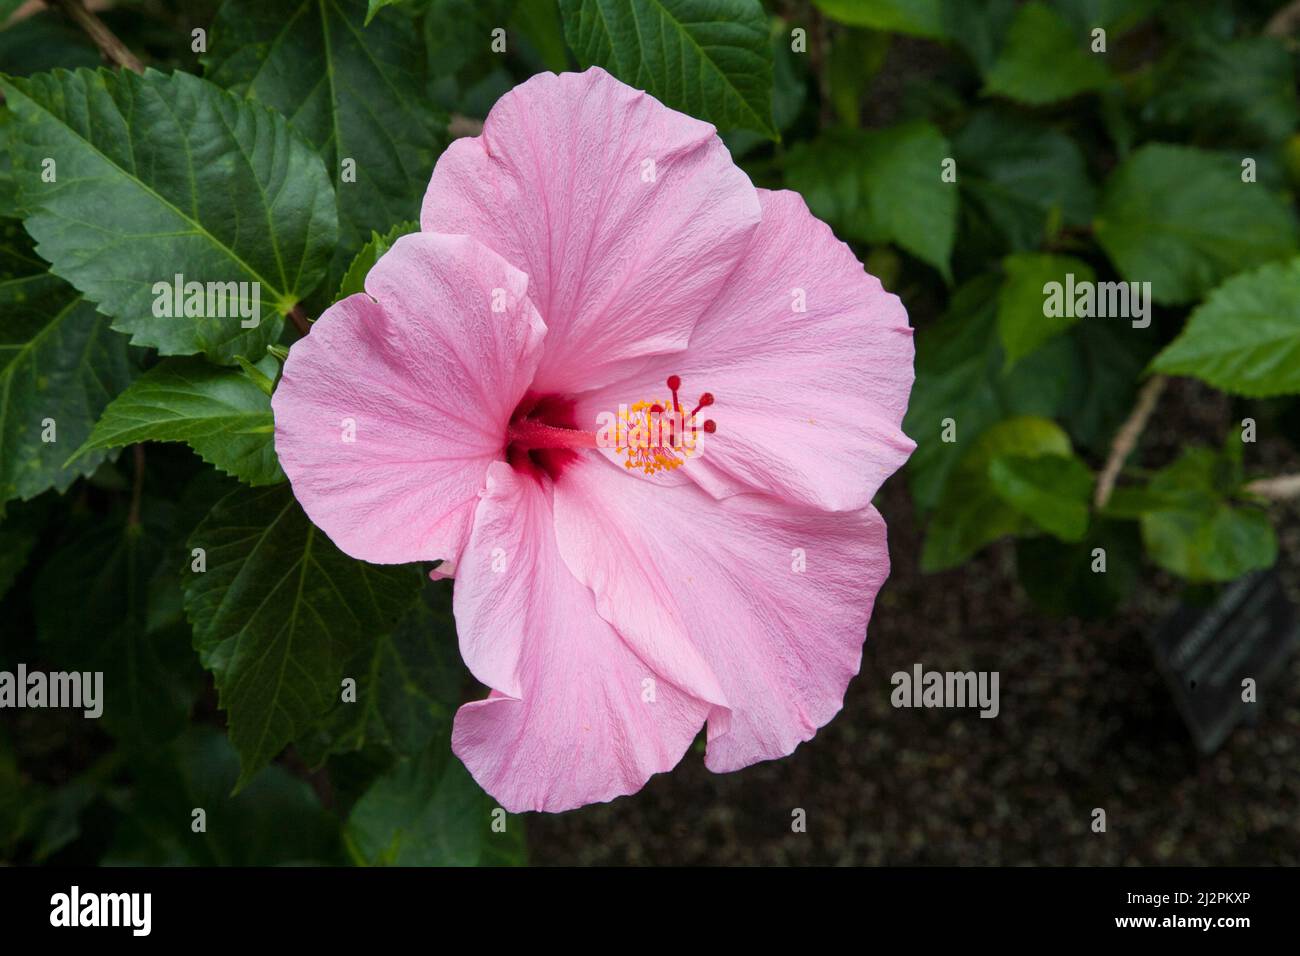 Pink Hibiscus flower close up in Longwood Gardens, Kennett Square, Pennsylvania, USA, PA  images US botanical gardens garden Stock Photo